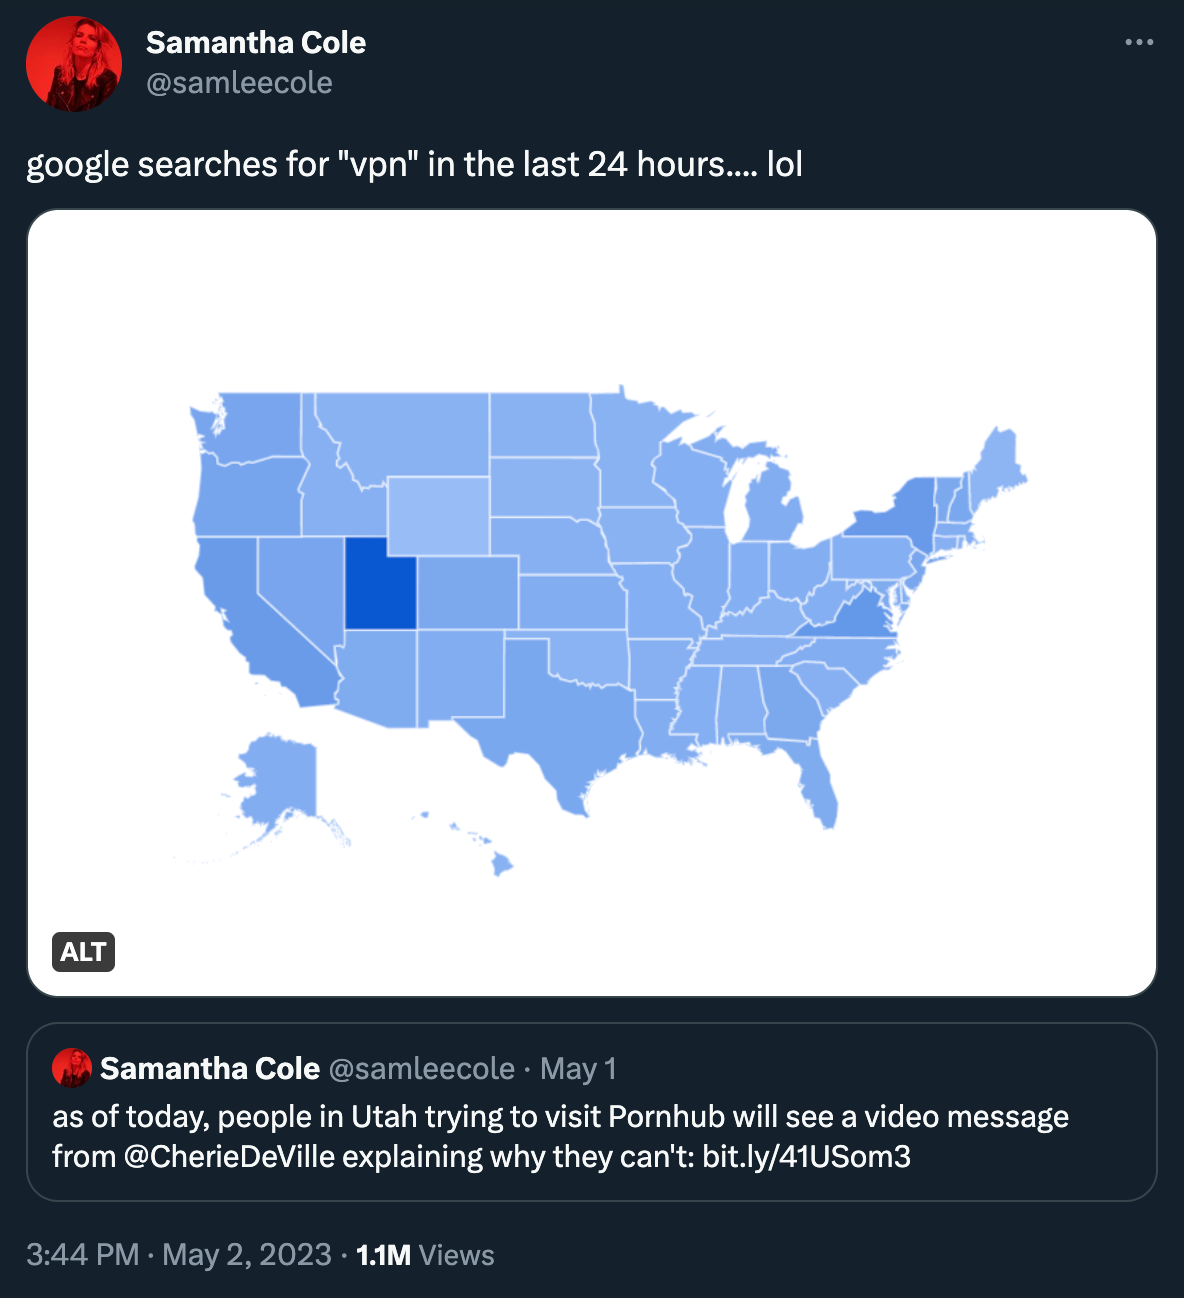 Samantha Cole tweets: “google searches for "vpn" in the last 24 hours.... lol,” above an image of the US with only Utah colored in dark blue. Below is a quote tweet of Cole’s earlier tweet: “as of today, people in Utah trying to visit Pornhub will see a video message from @CherieDeVille explaining why they can't”